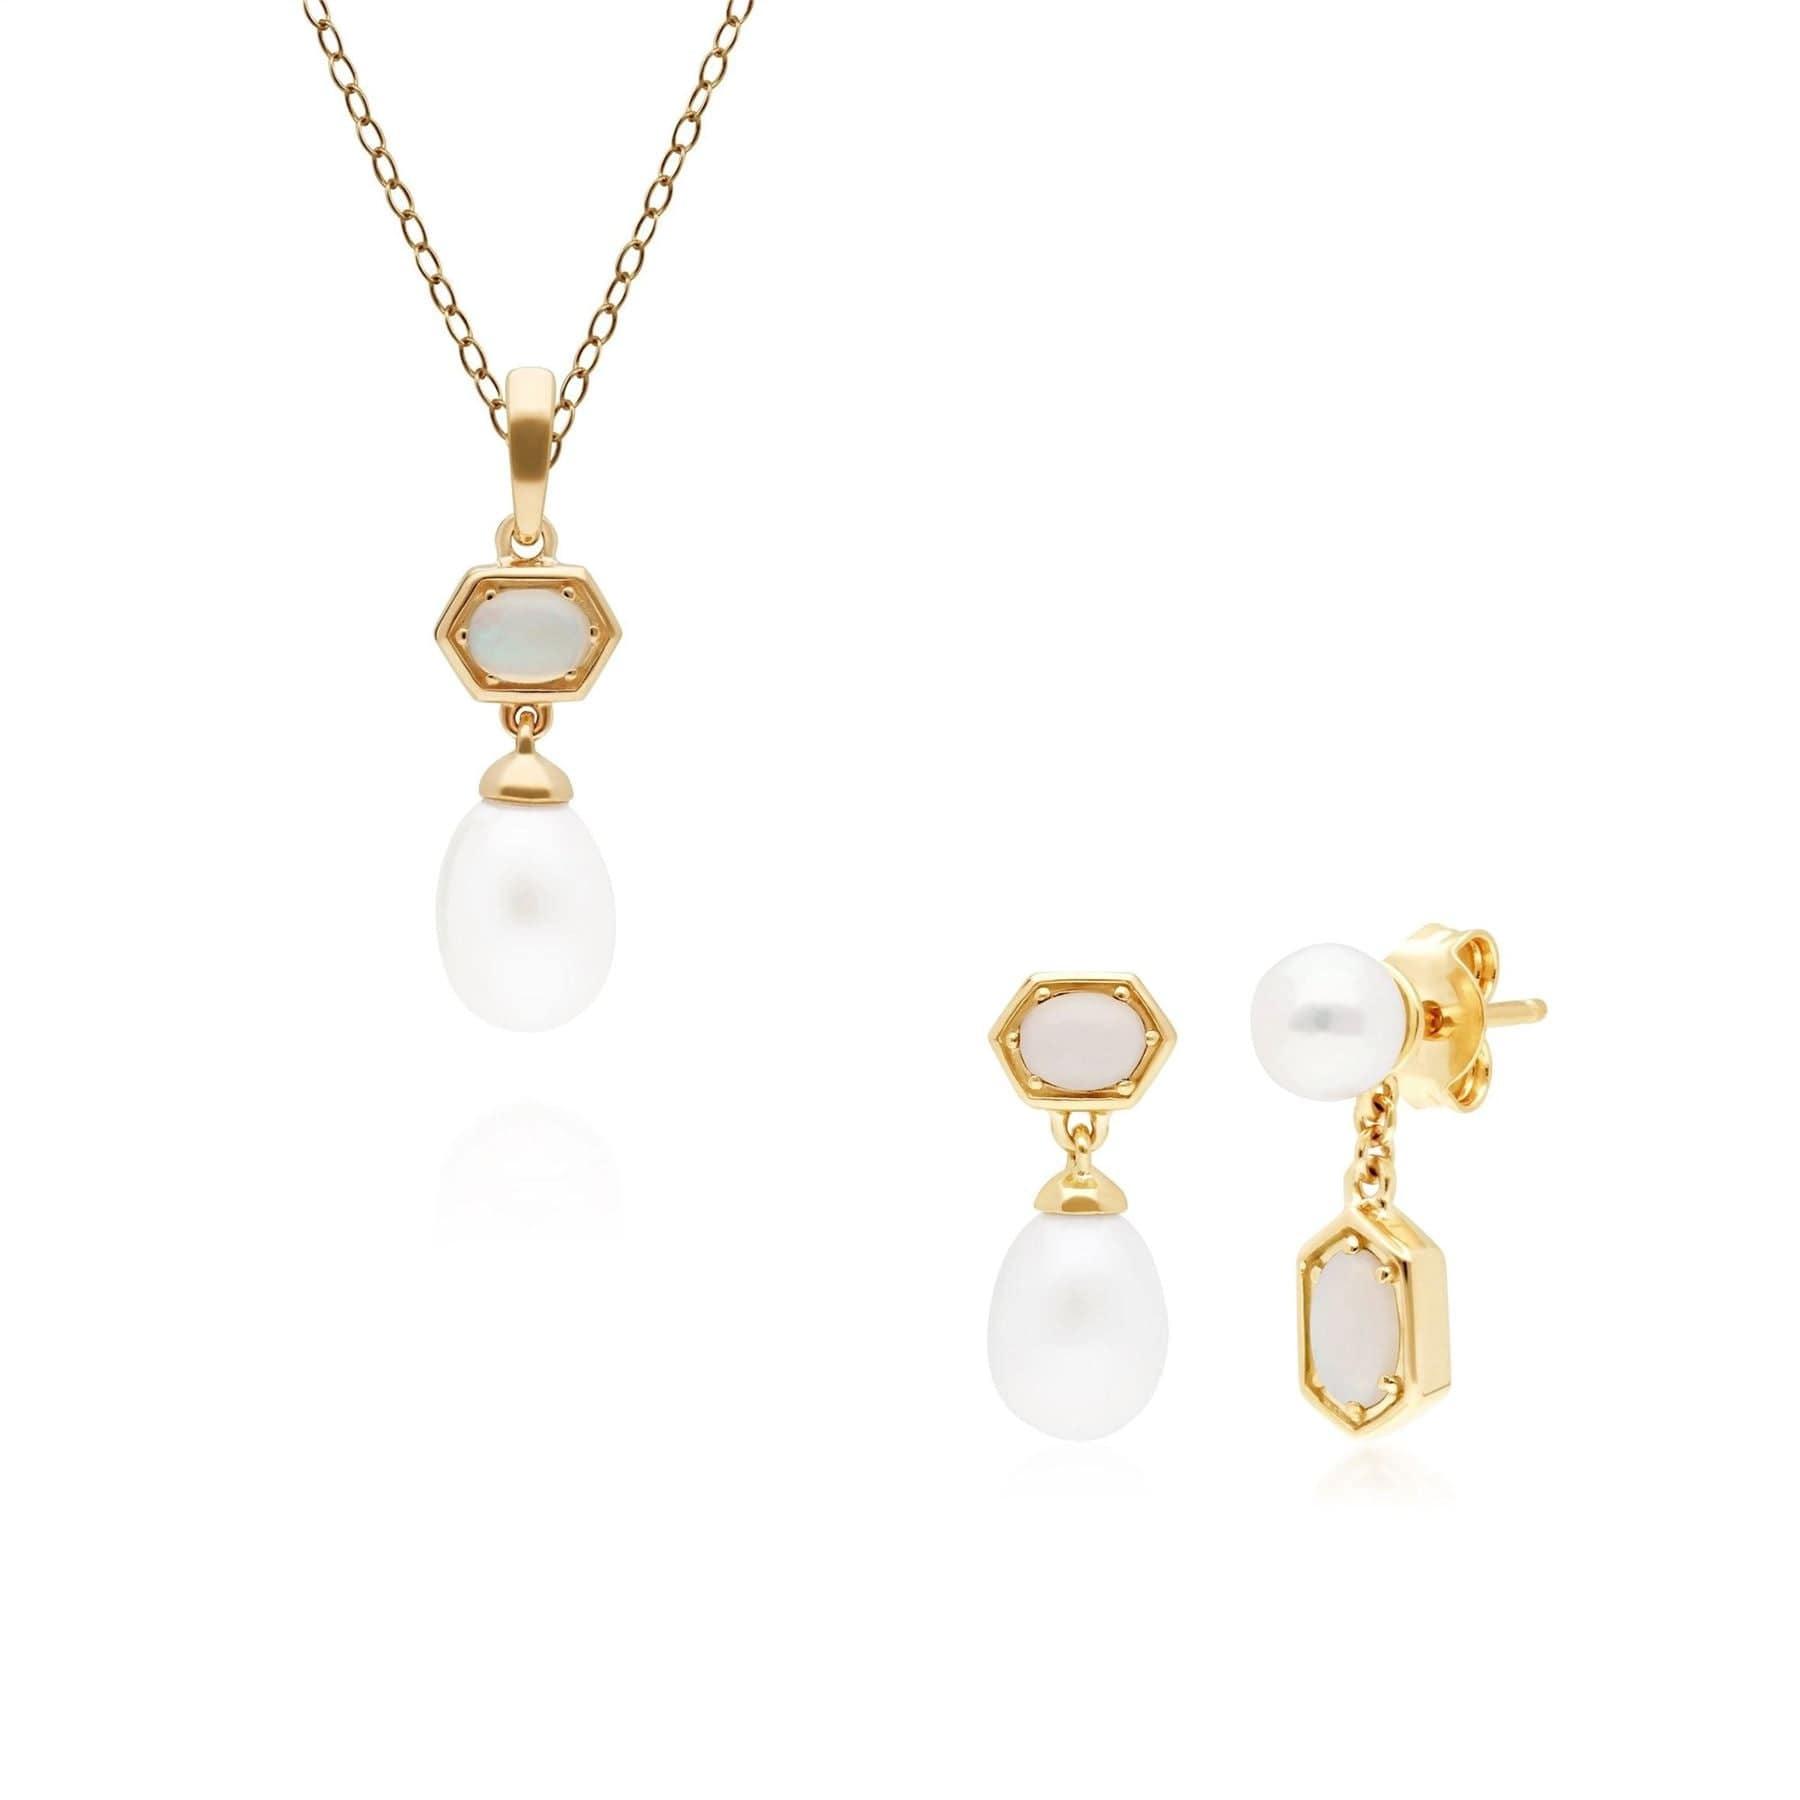 270P030601925-270E030601925 Modern Pearl & Opal Pendant & Earring Set in Gold Plated Silver 1